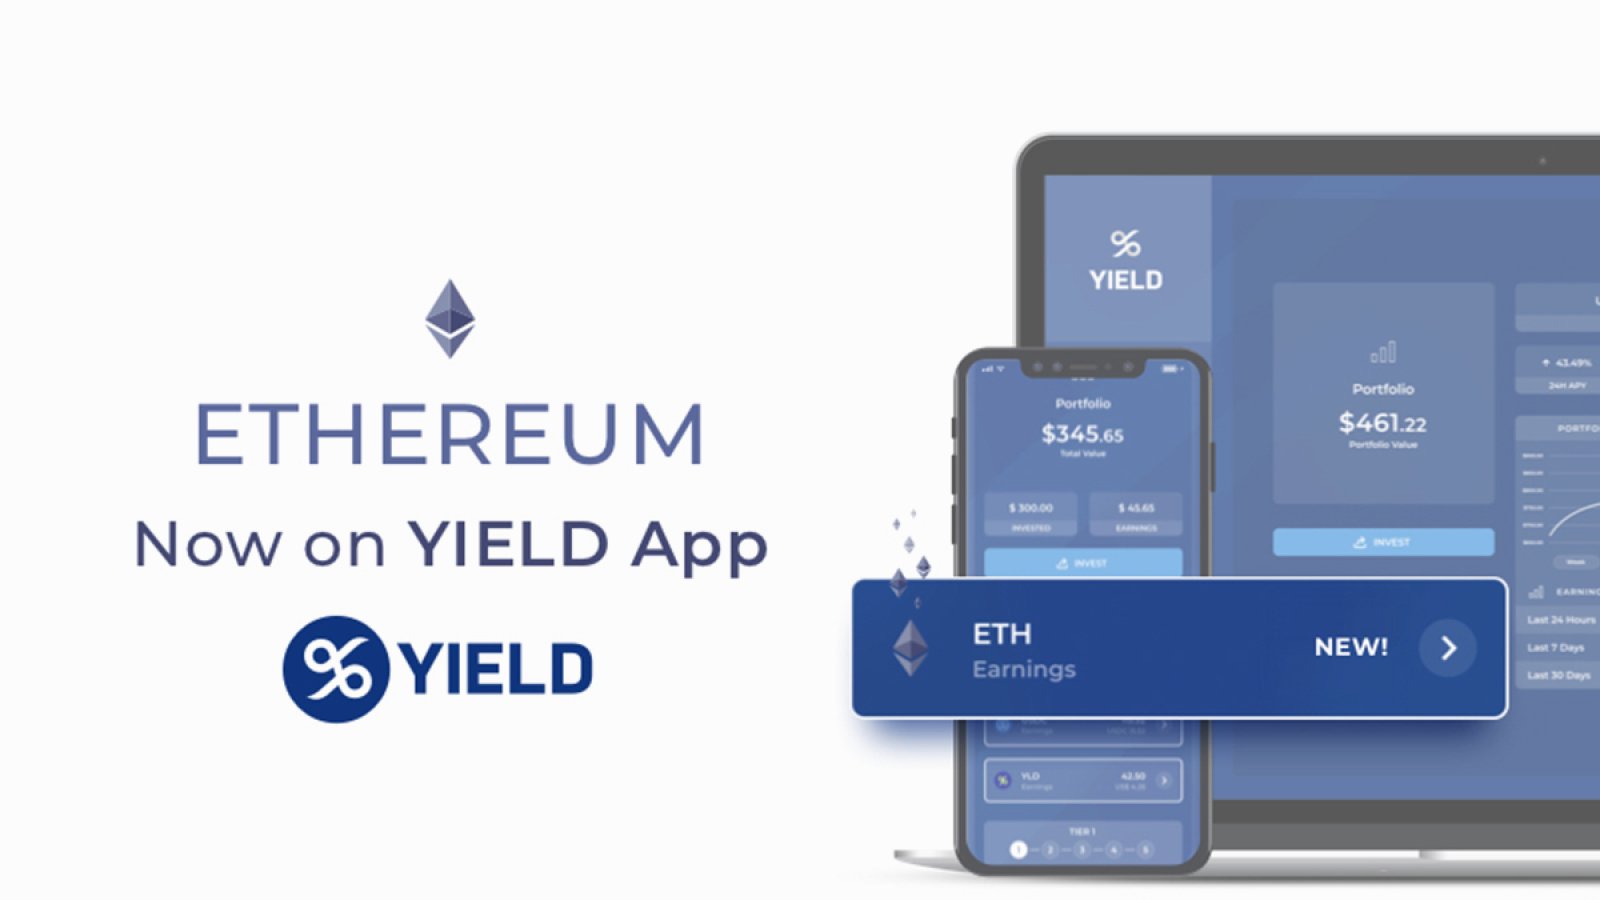 YIELD App Launches Ethereum Fund, Gives Users Up To 20% APY